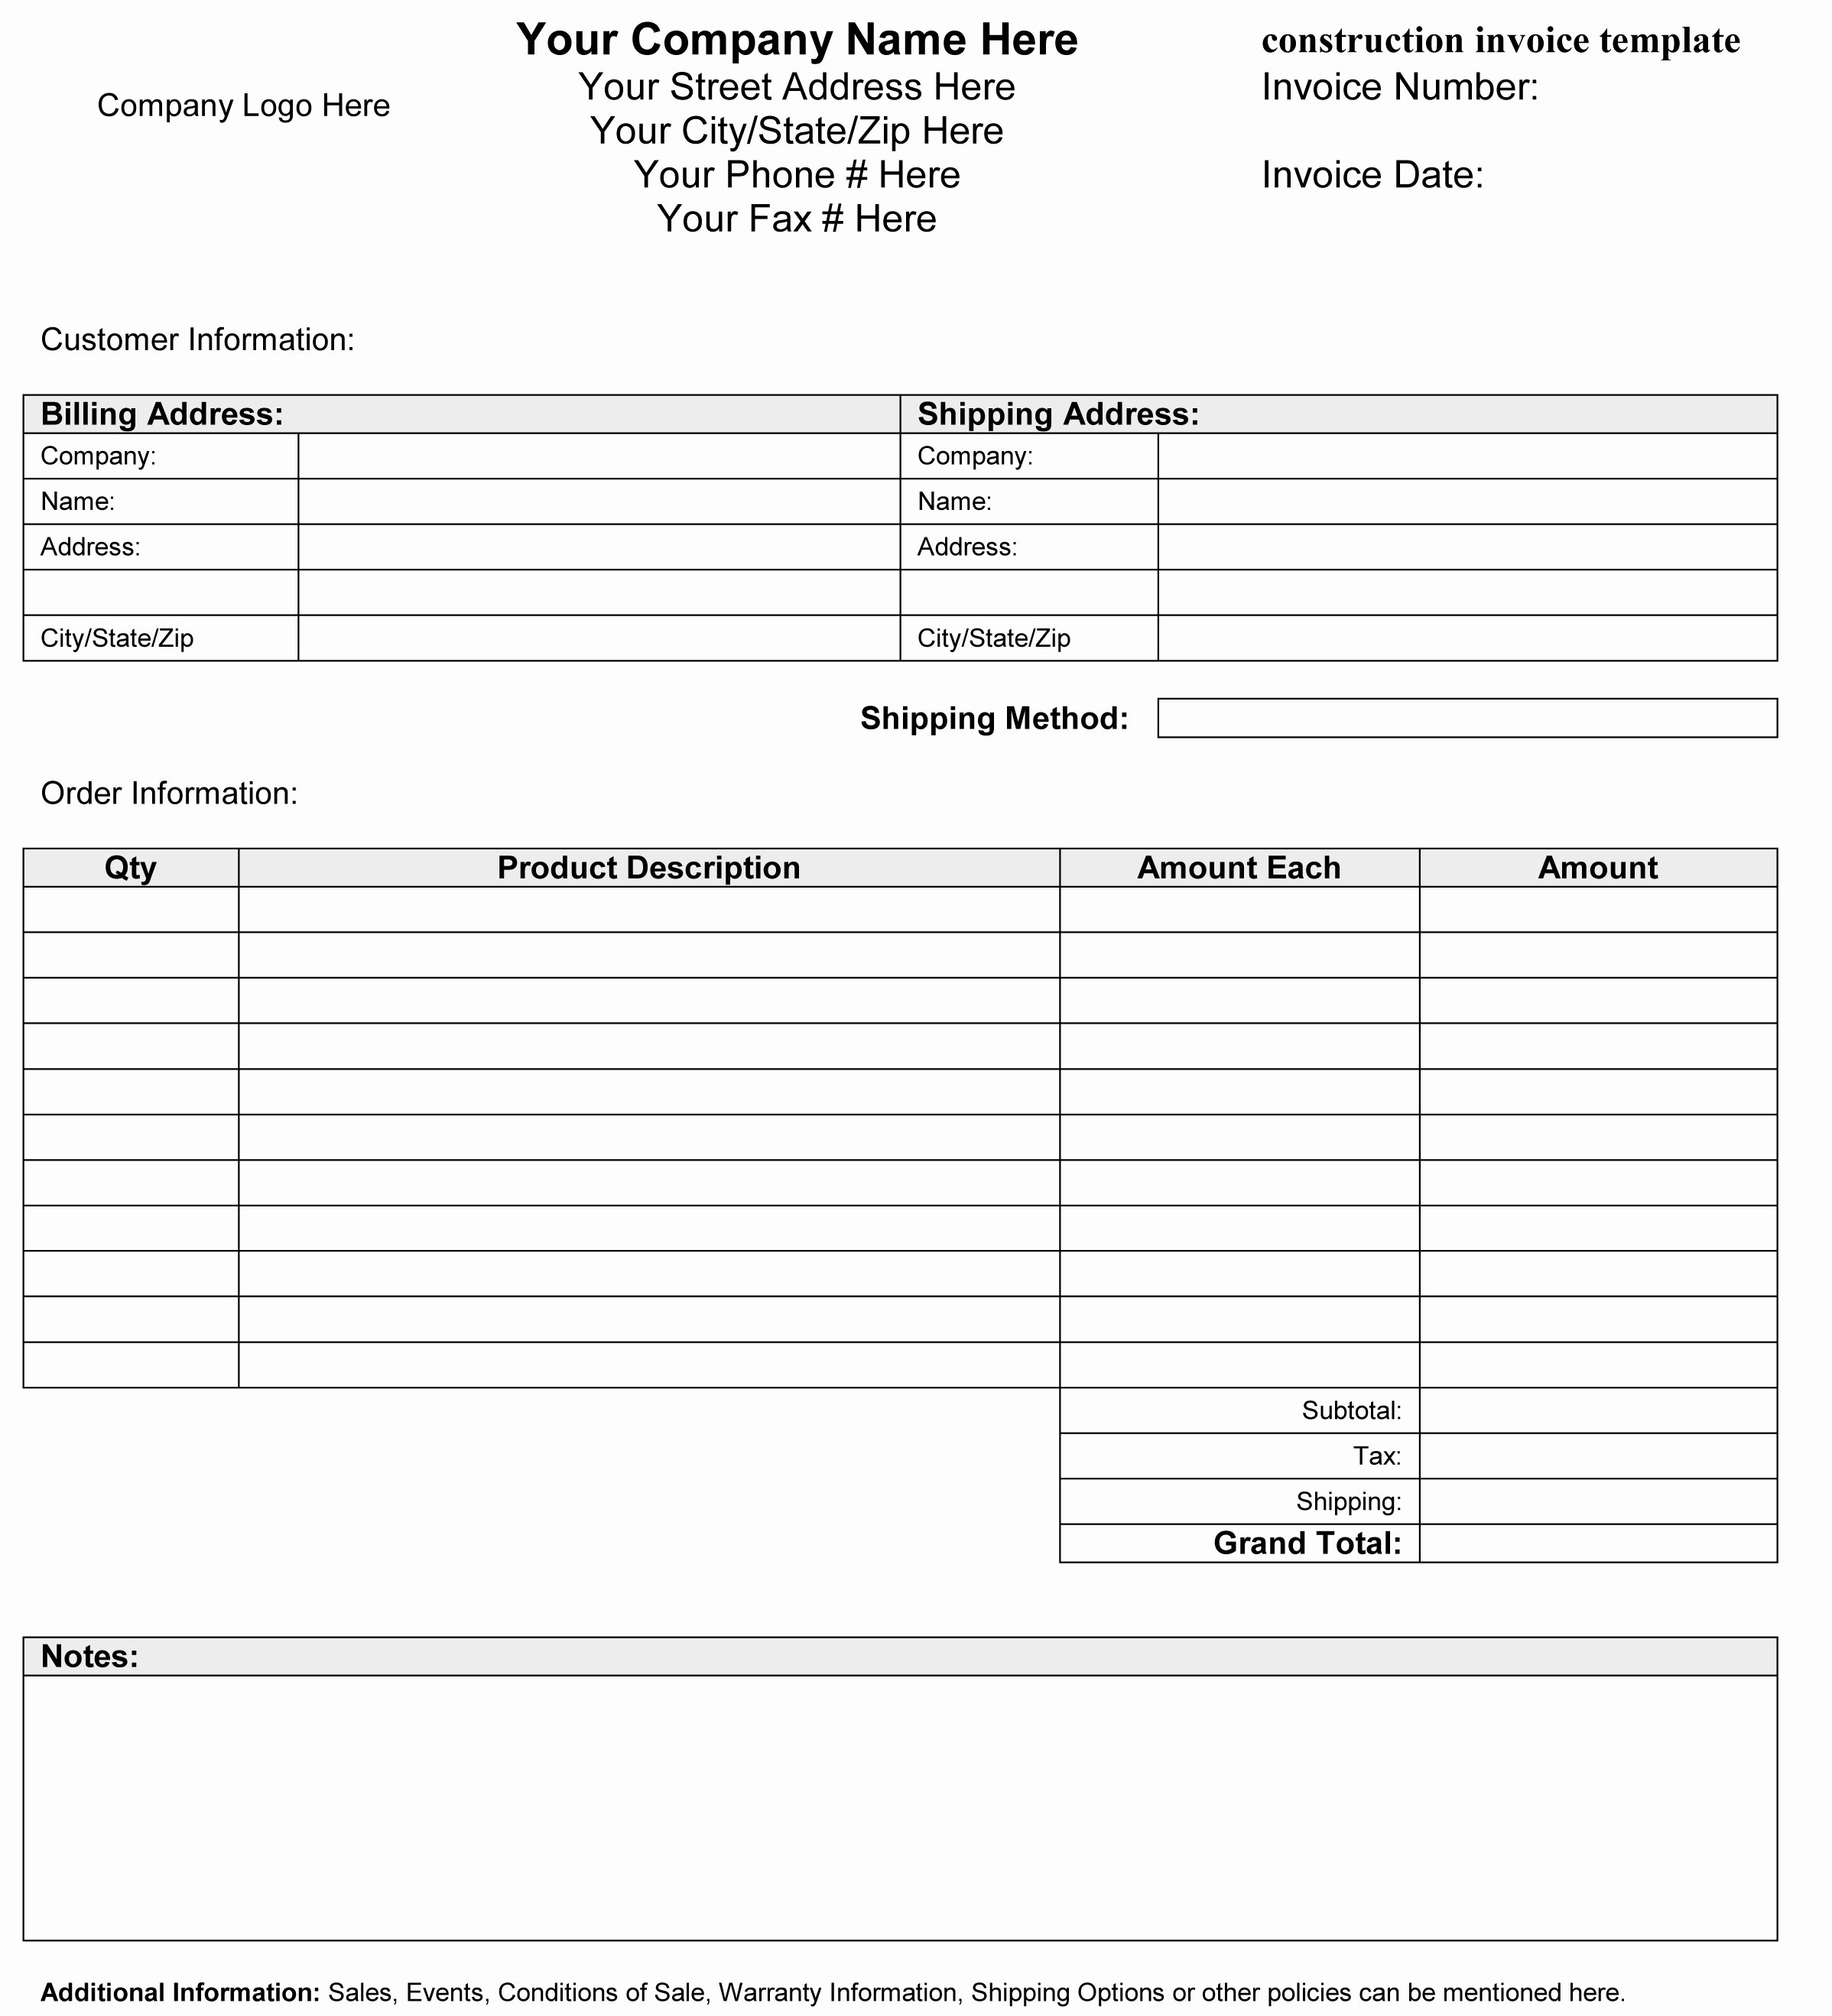 Contractor Invoice Template Free Inspirational Construction Invoice Template